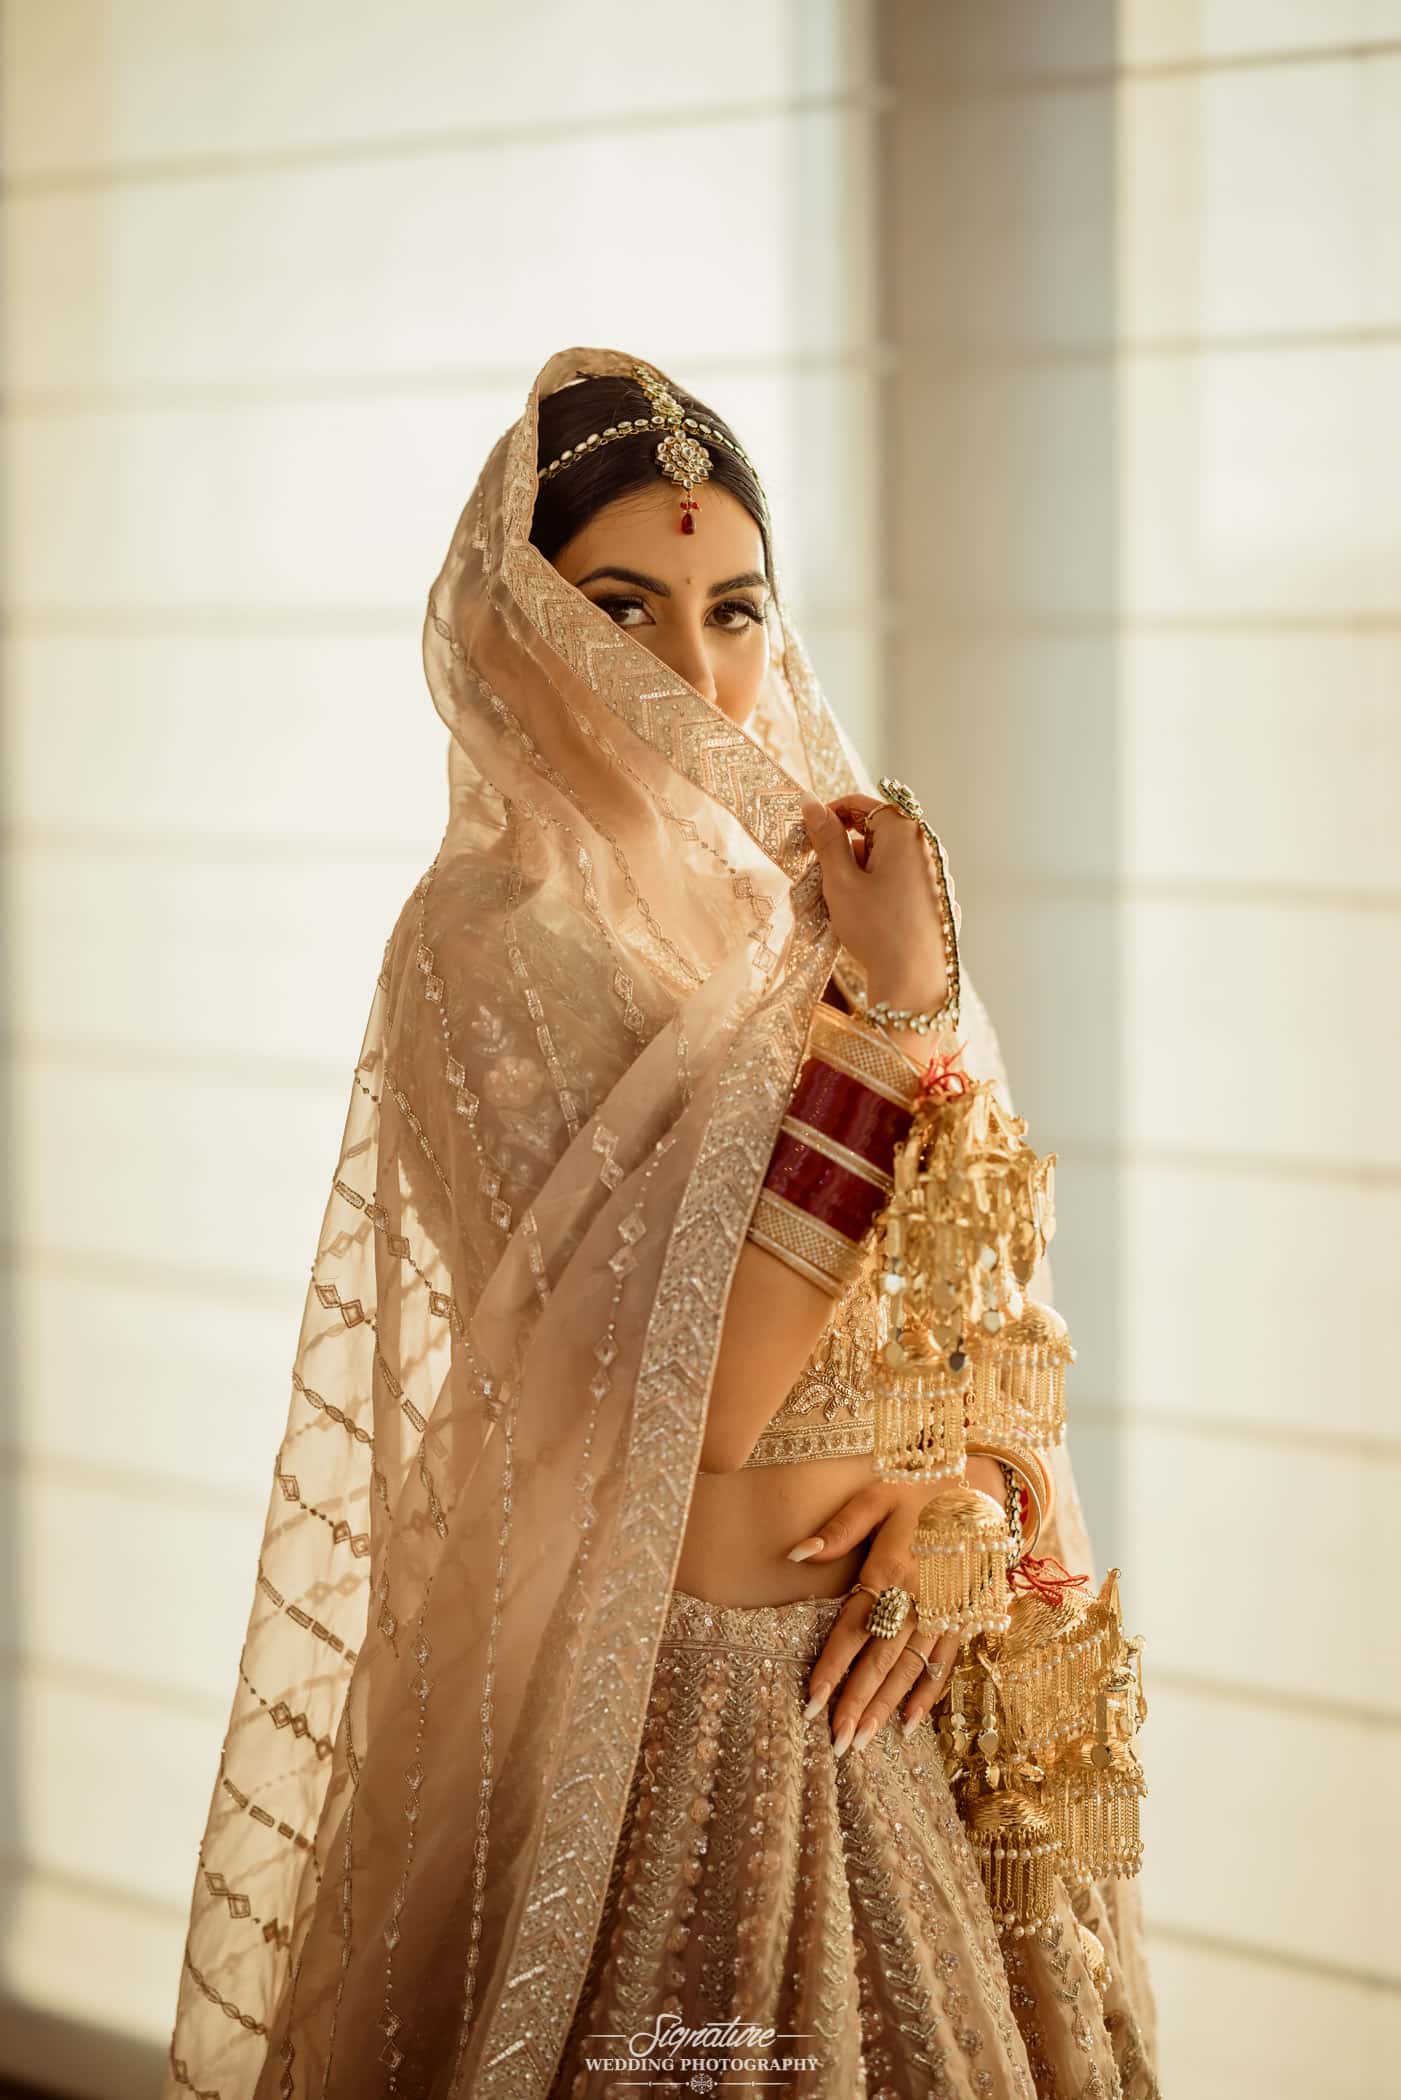 Indian bride looking at camera over veil